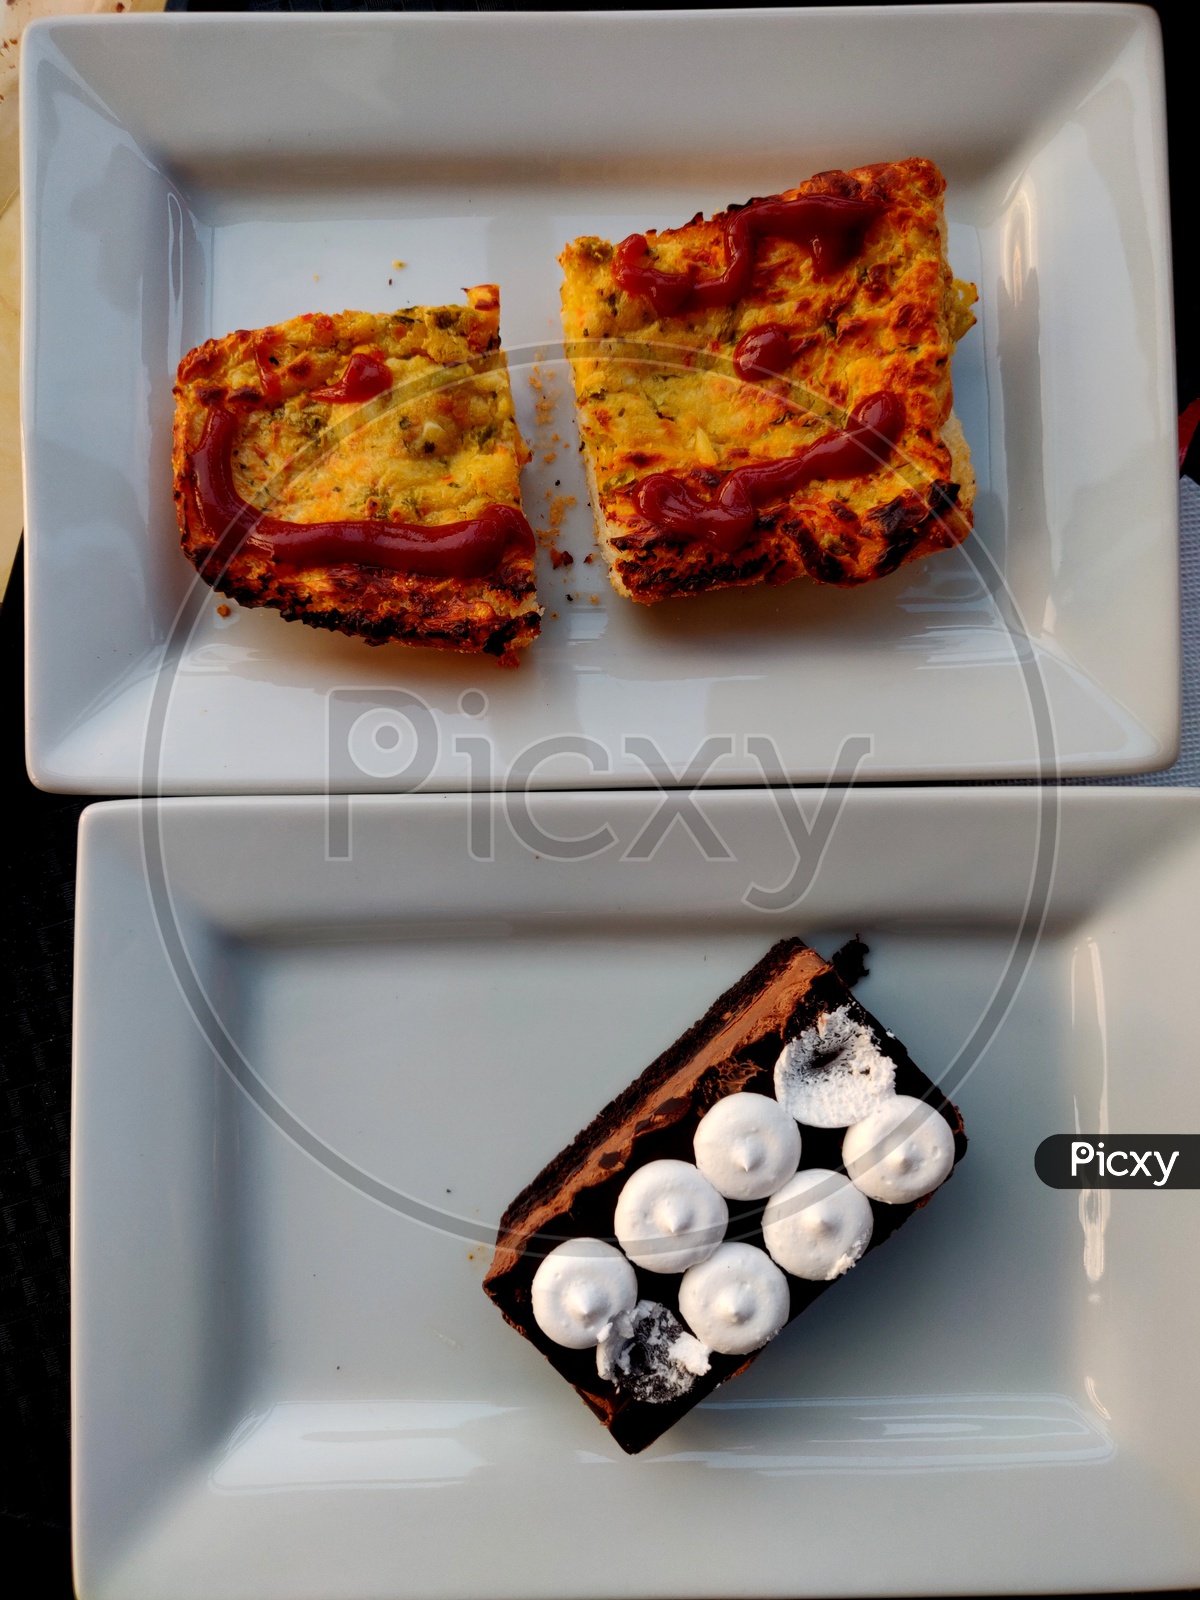 Chilli Cheese Toastizza with Royal Pastry